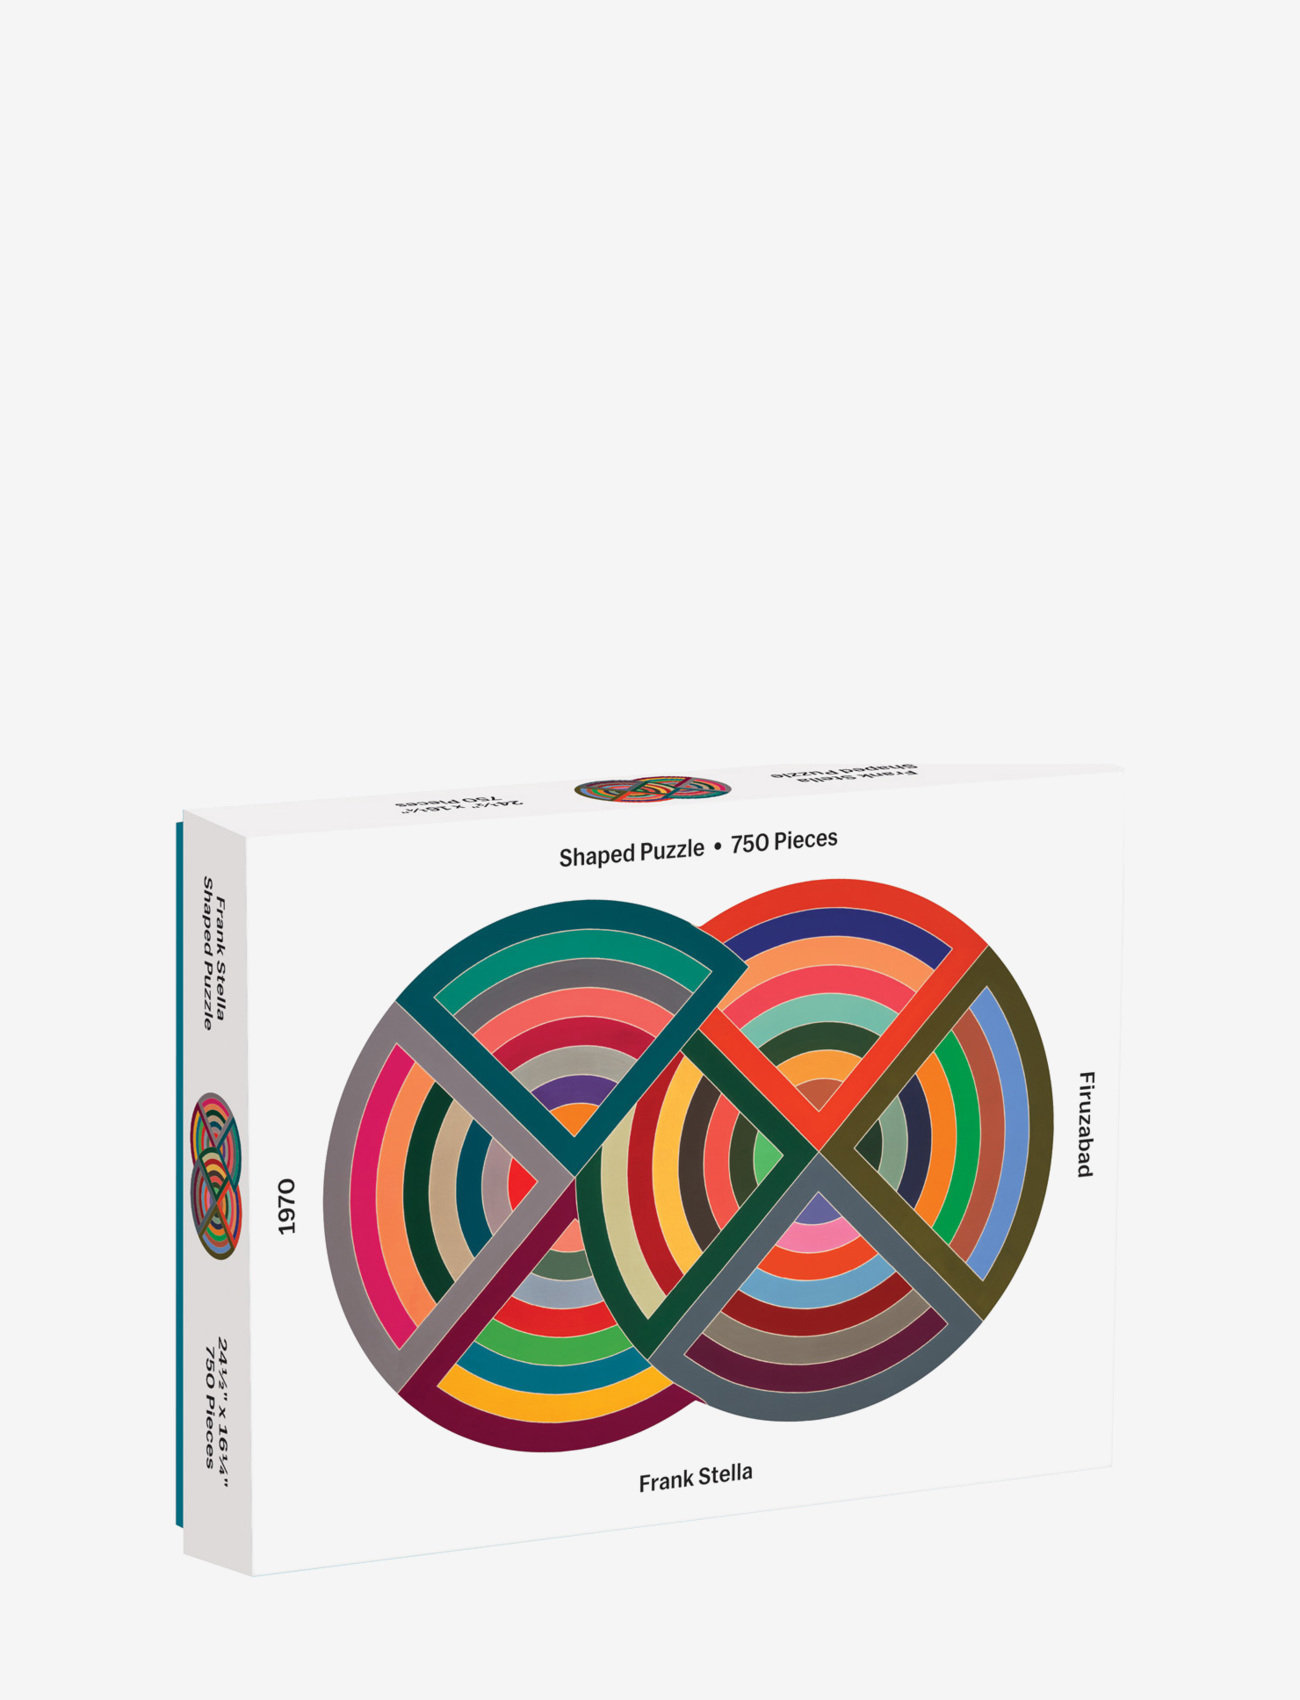 New Mags - Moma Frank Stella 750 Piece Shaped Puzzle - die niedrigsten preise - multicolor/white - 0